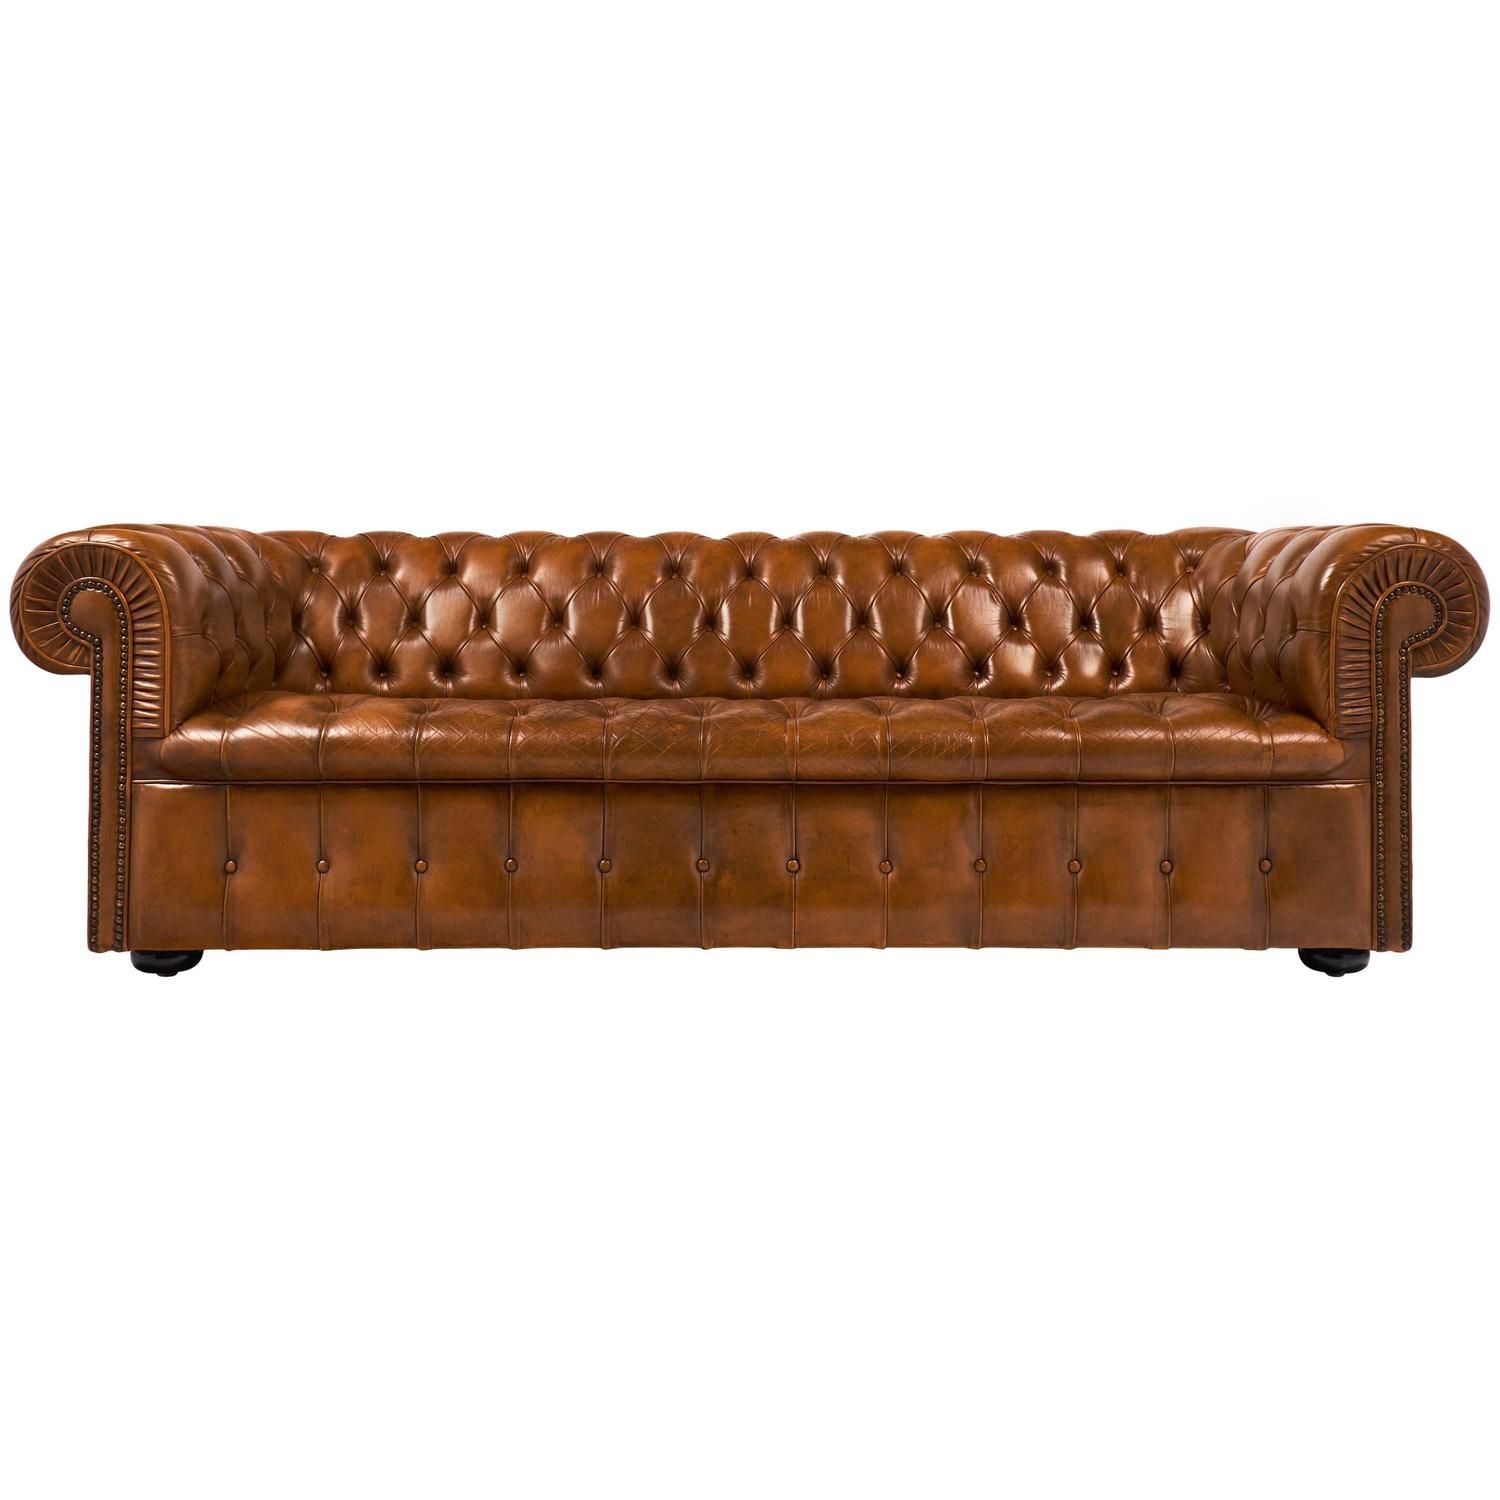 Vintage English Cognac Leather Chesterfield Sofa At 1stdibs With Regard To Vintage Chesterfield Sofas (View 13 of 15)